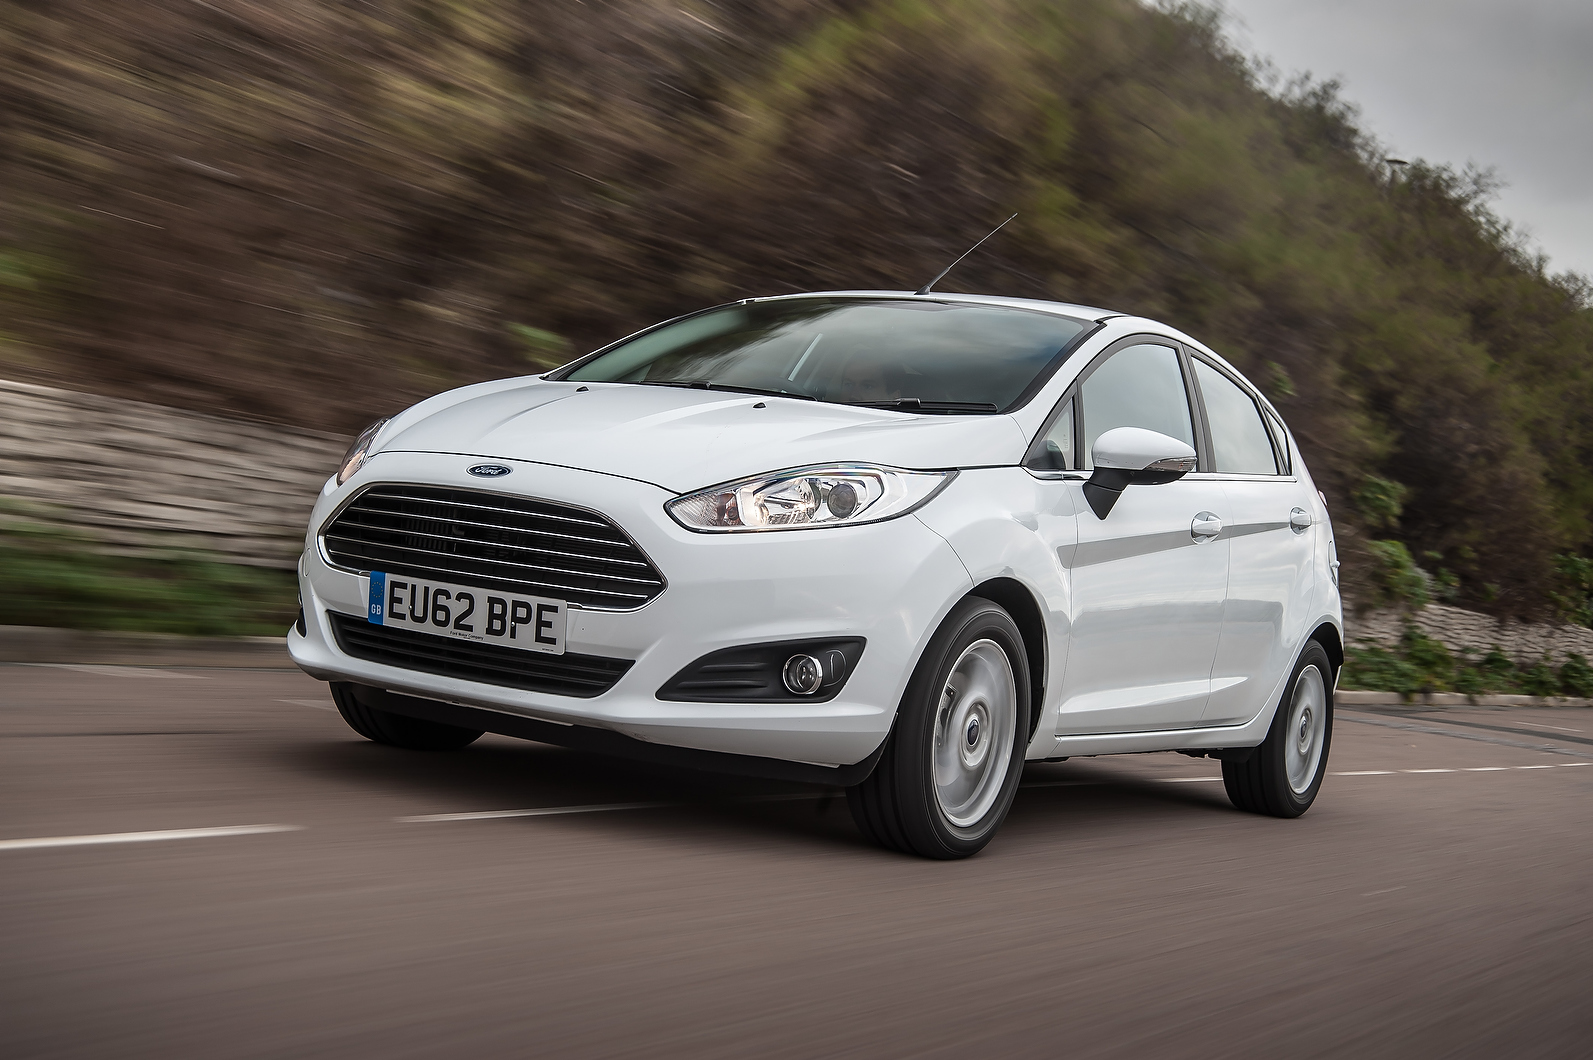 Everything You Need to Know About the New Ford Fiesta and Fiesta